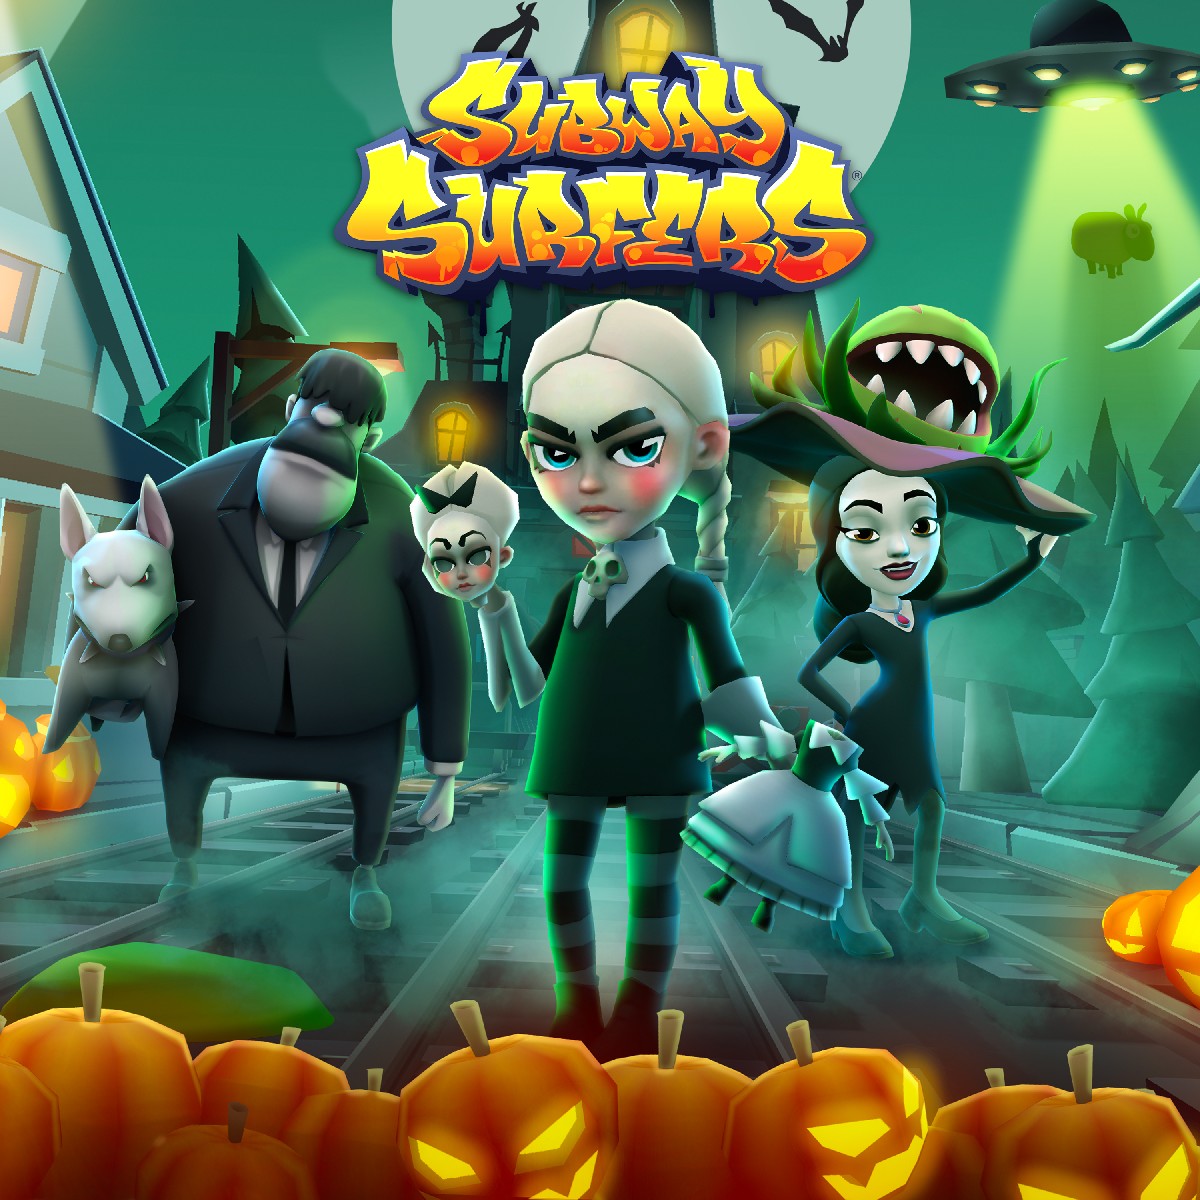 Subway Surfers on X: Subway Surfers is in Haunted Hood with a